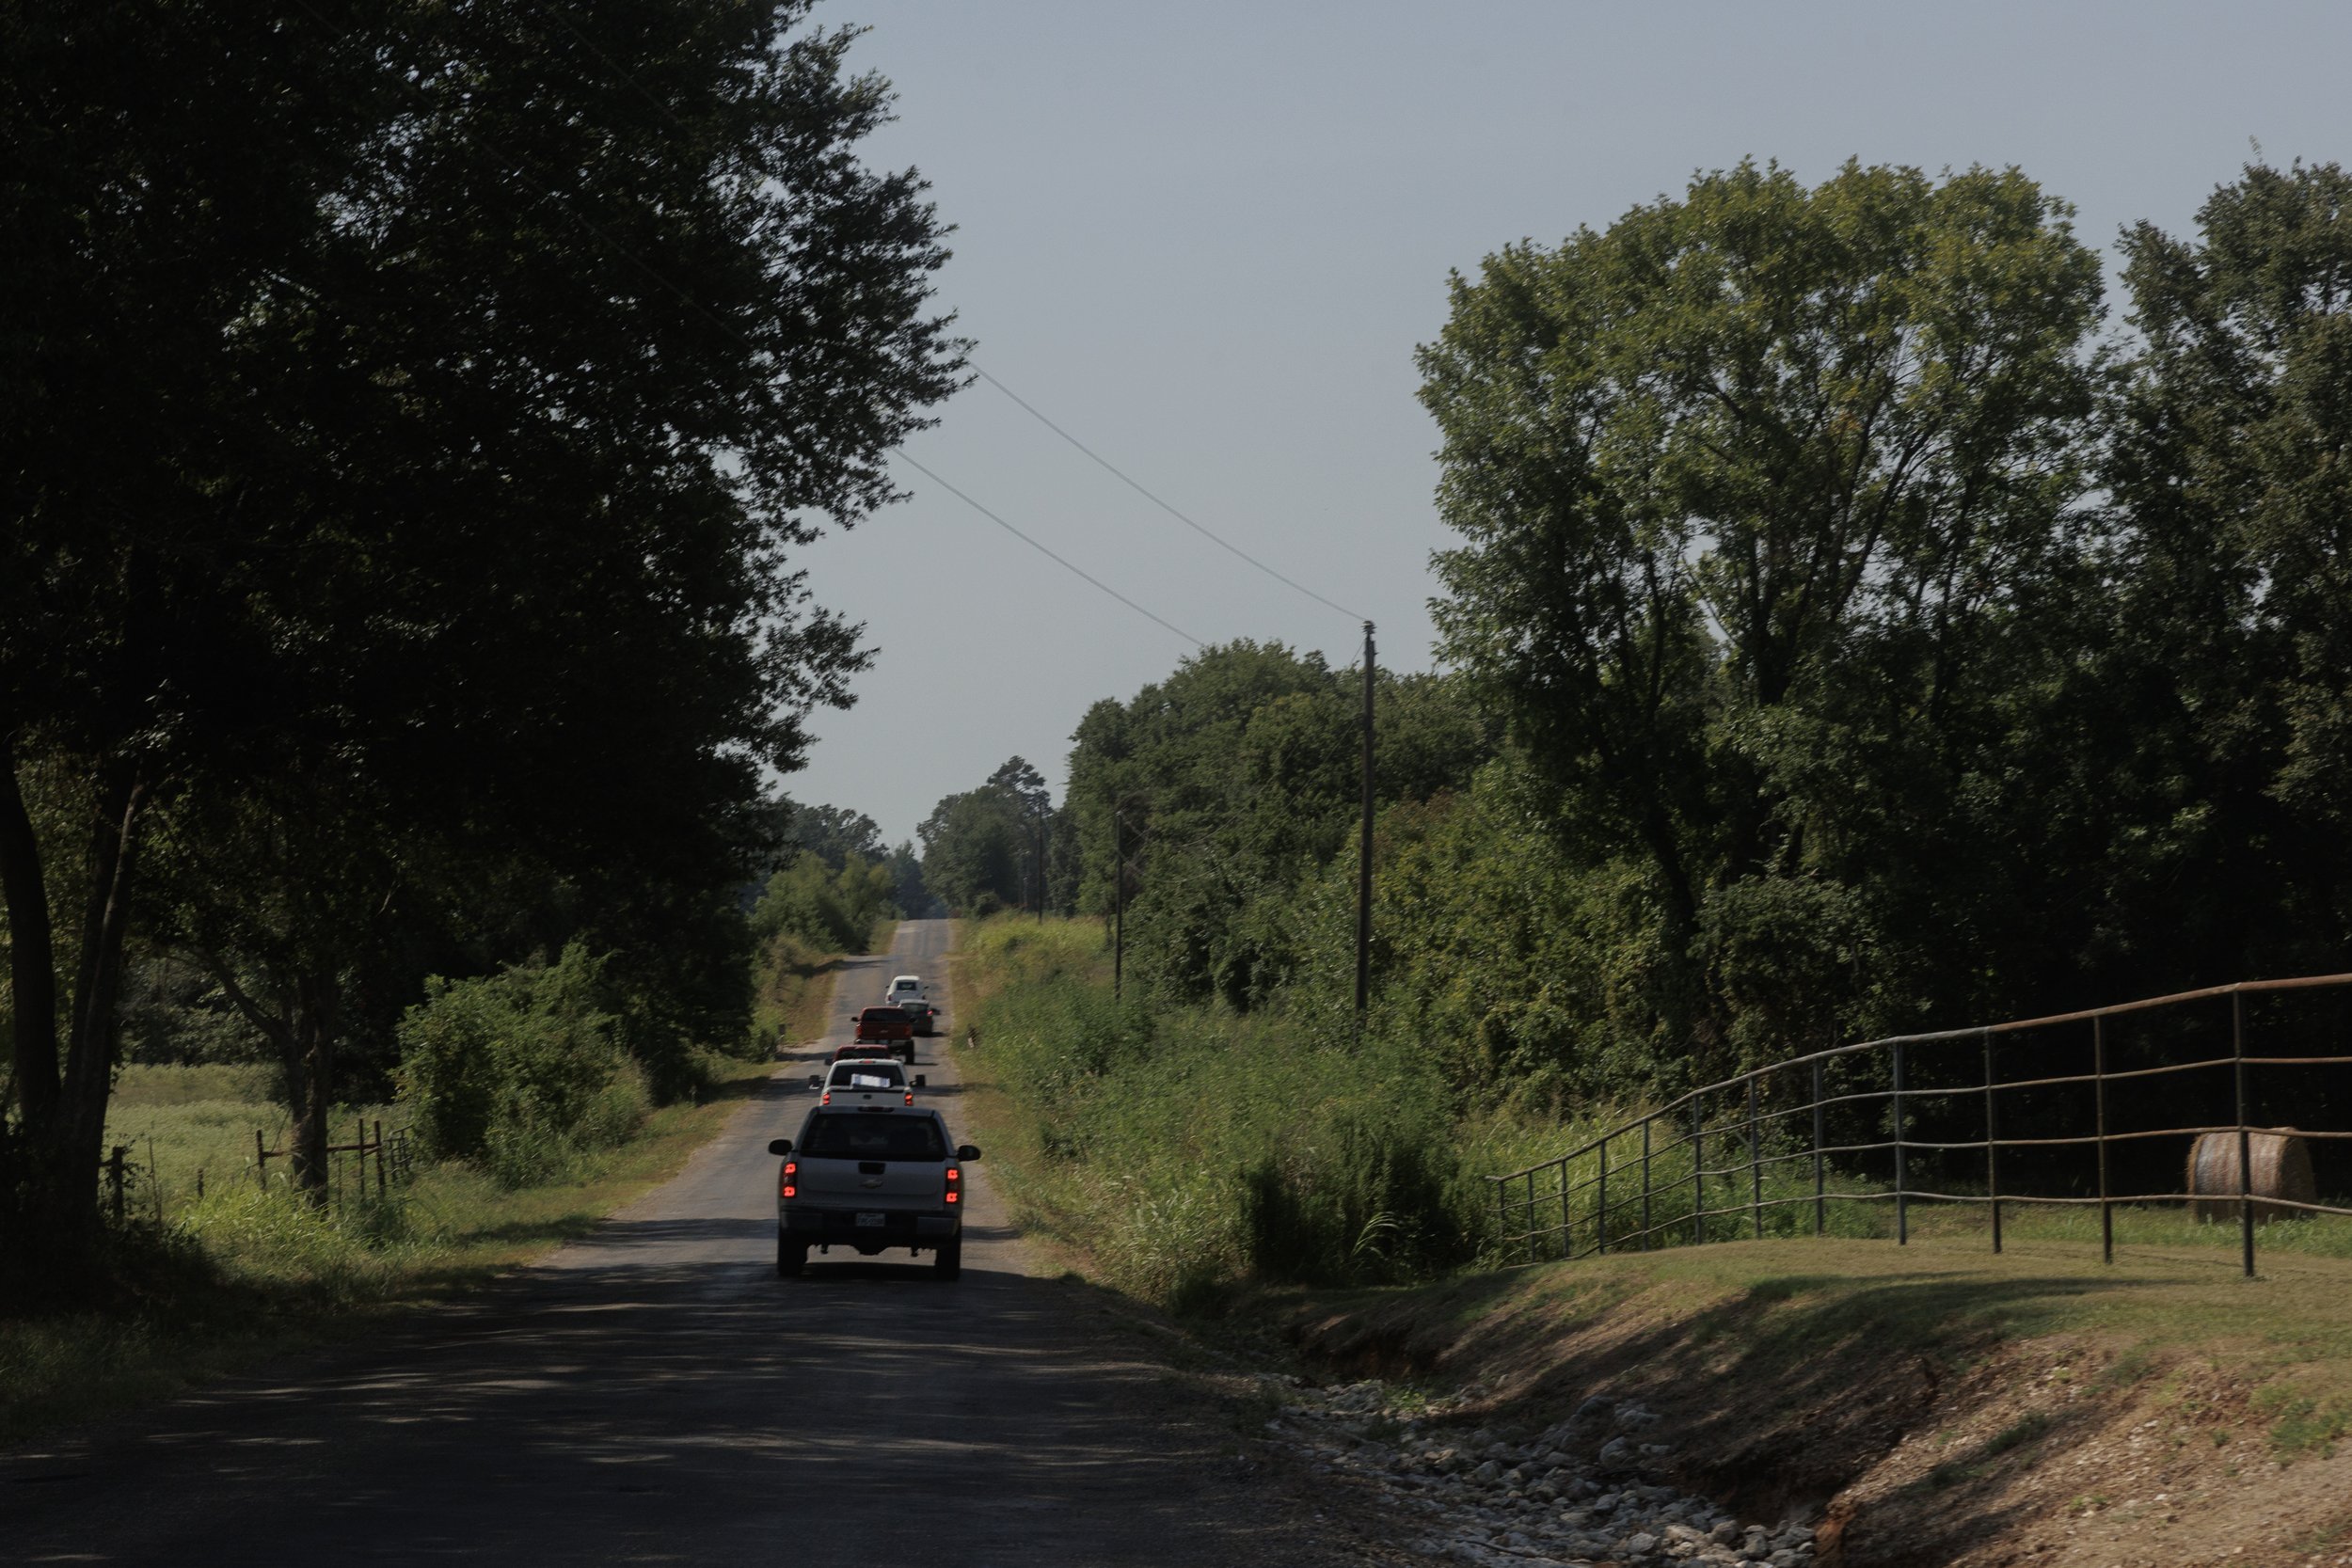  The funeral procession drives down country roads to the cemetery where the twins will be buried in Broken Bow, Oklahoma. 